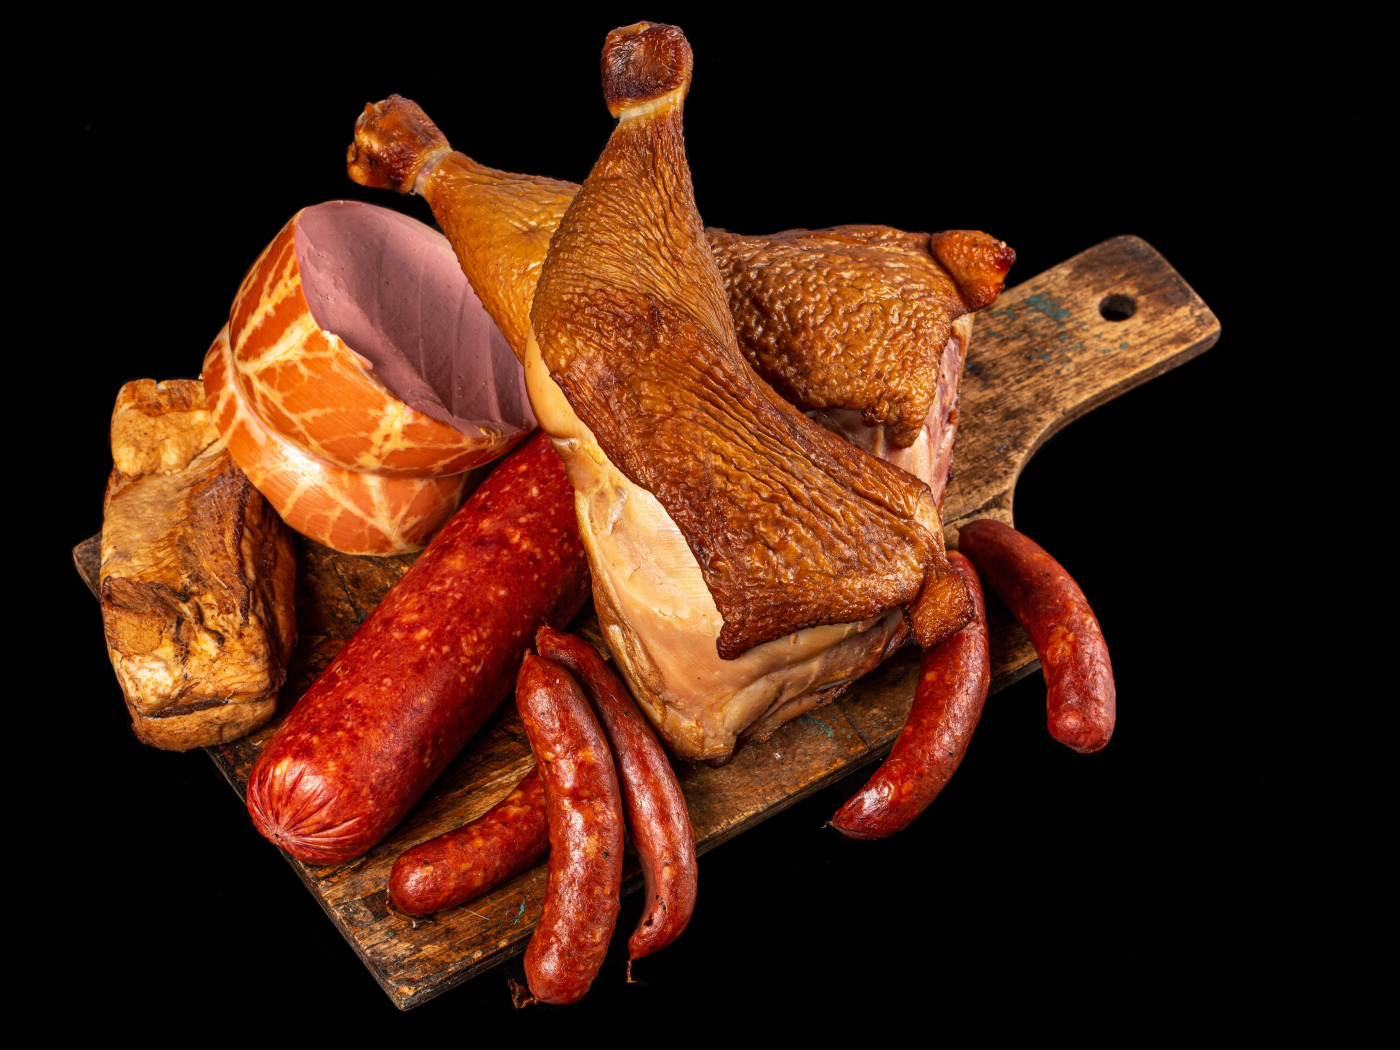 Appetizing smoked meats and sausage on a black background